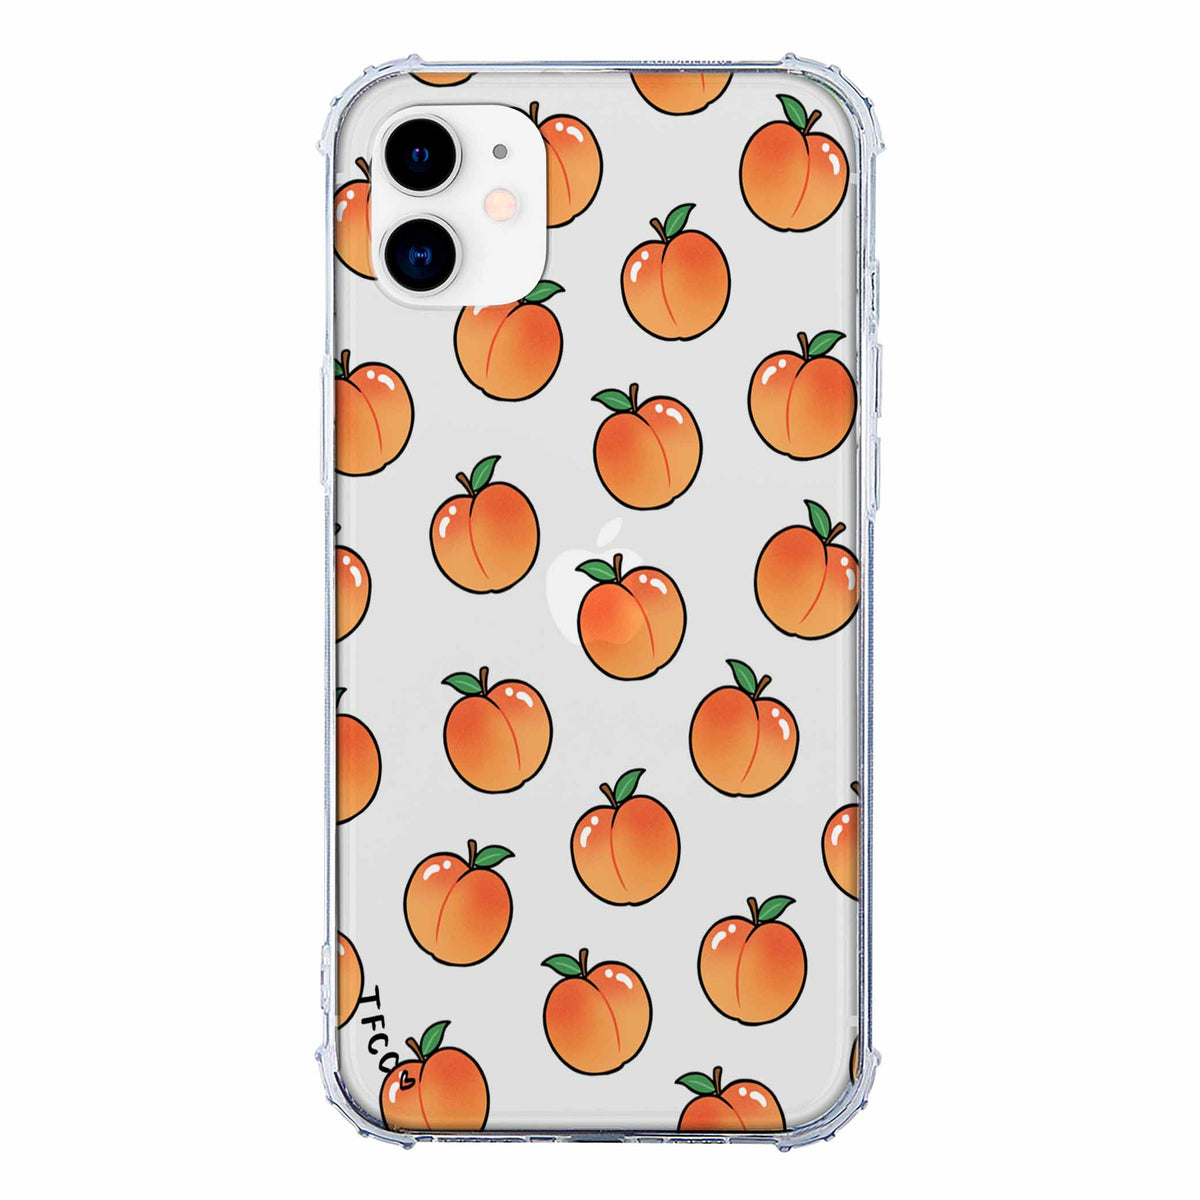 PEACH CLEAR CASE - thefonecasecompany